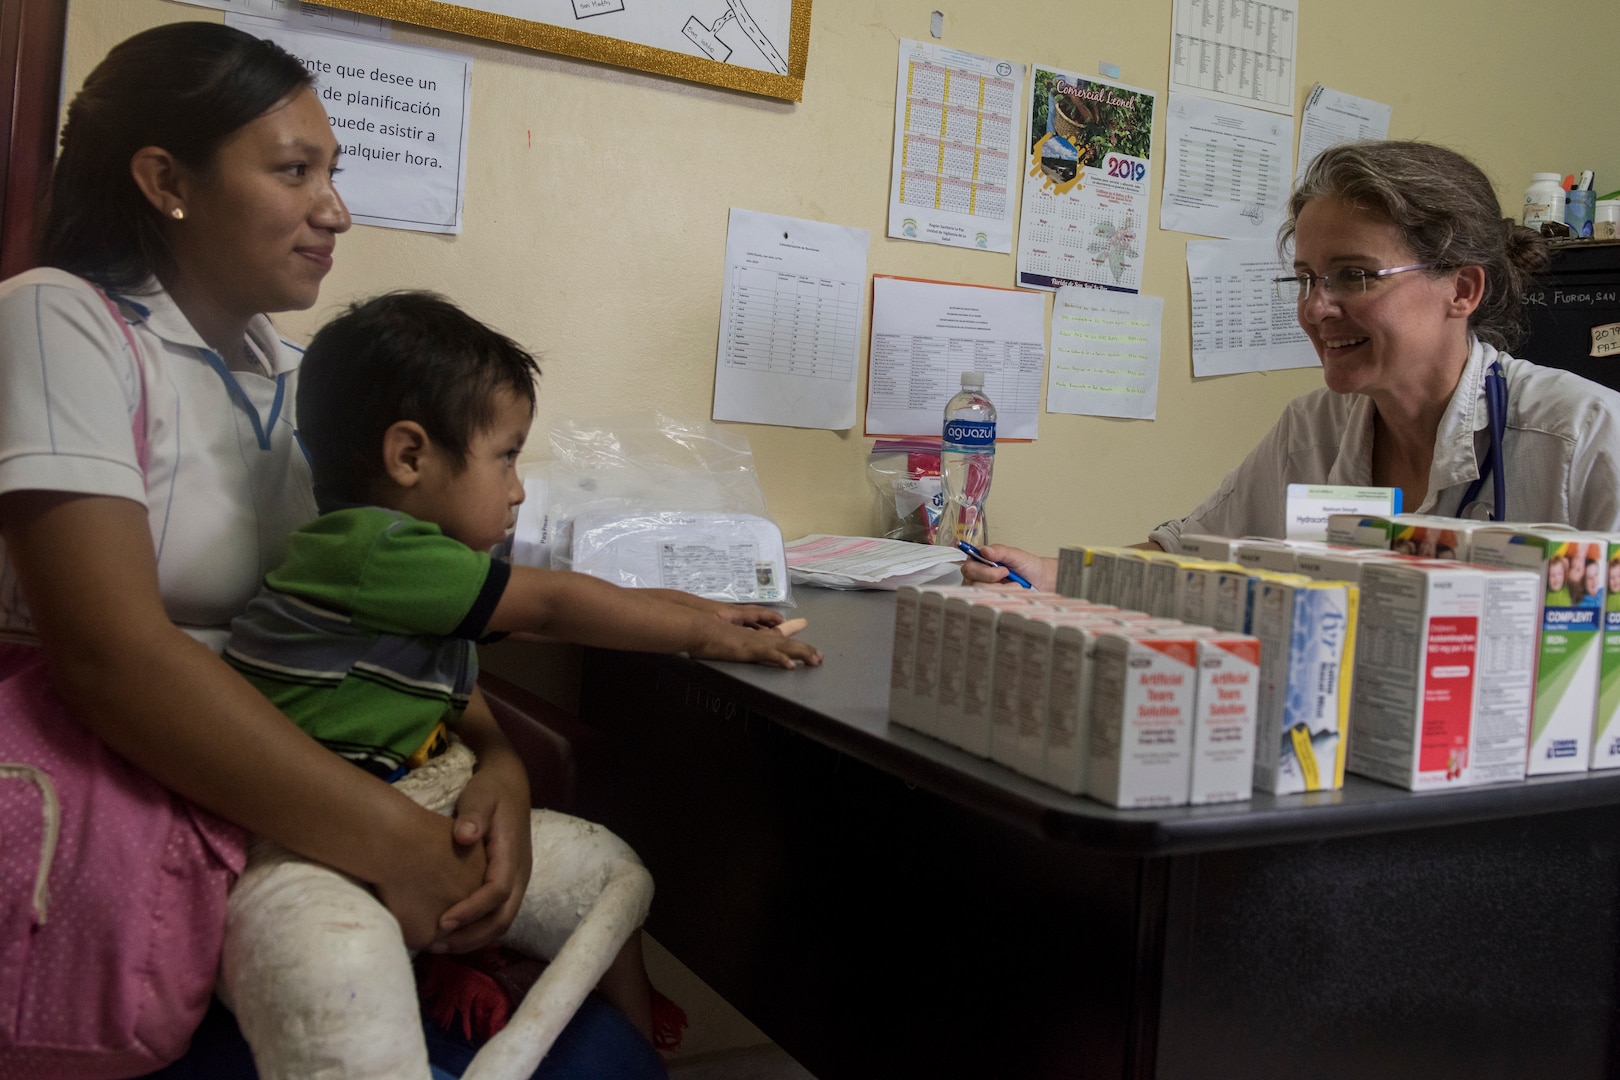 U.S. Army Lt. Col. Anne Johnson, Joint Task Force – Bravo Medical Element physician, reviews a child’s symptoms with his mother during a Pediatric Medical Readiness Training Exercise May 23, 2019 in La Paz, Honduras. MEDRET missions allow JTF-B medical personnel to train in their areas of expertise, while providing a service and strengthening partnership with the host nation. The service members saw approximately 120 patients during the mission. (U.S. Air Force photo by Staff Sgt. Eric Summers Jr.)